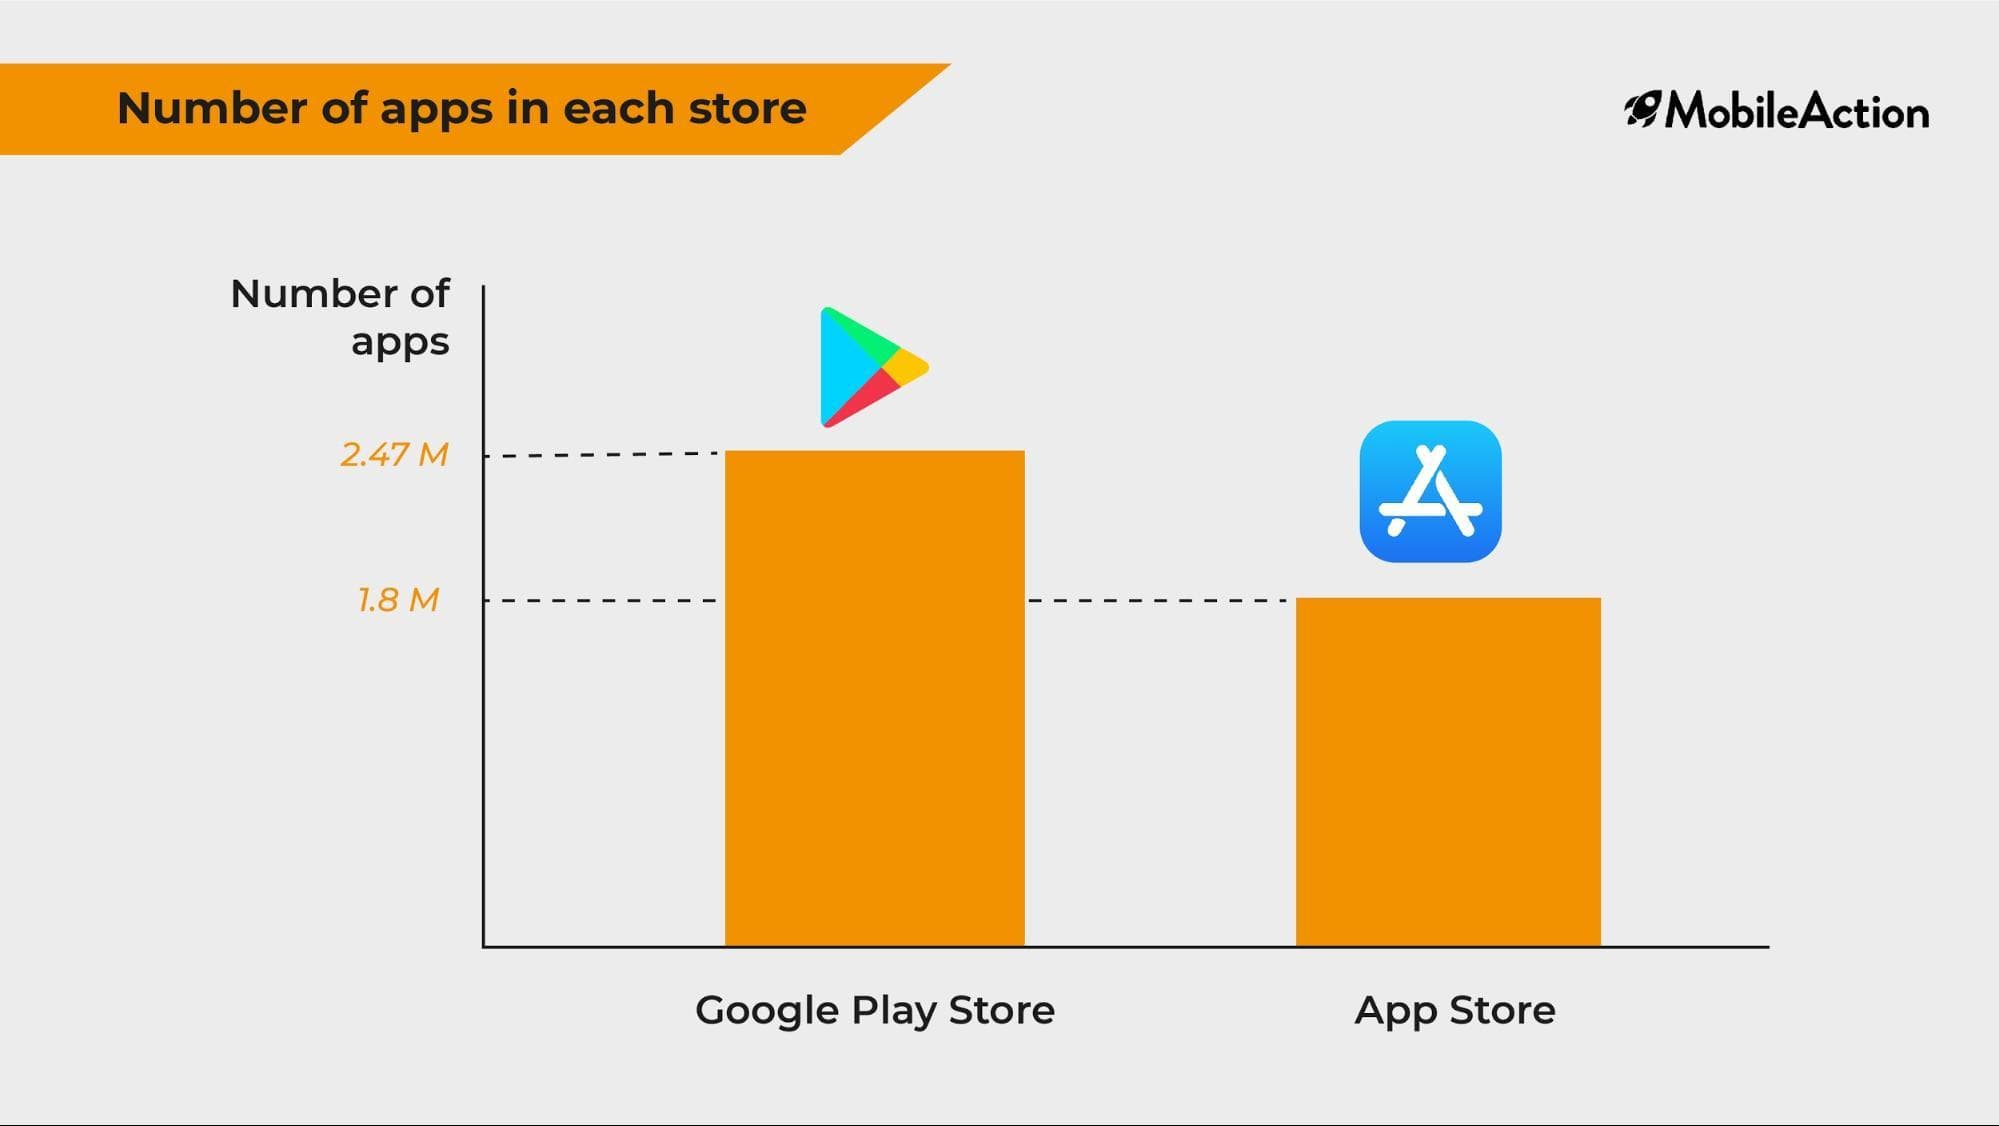 Number of Apps in the App Store and Google Play Store